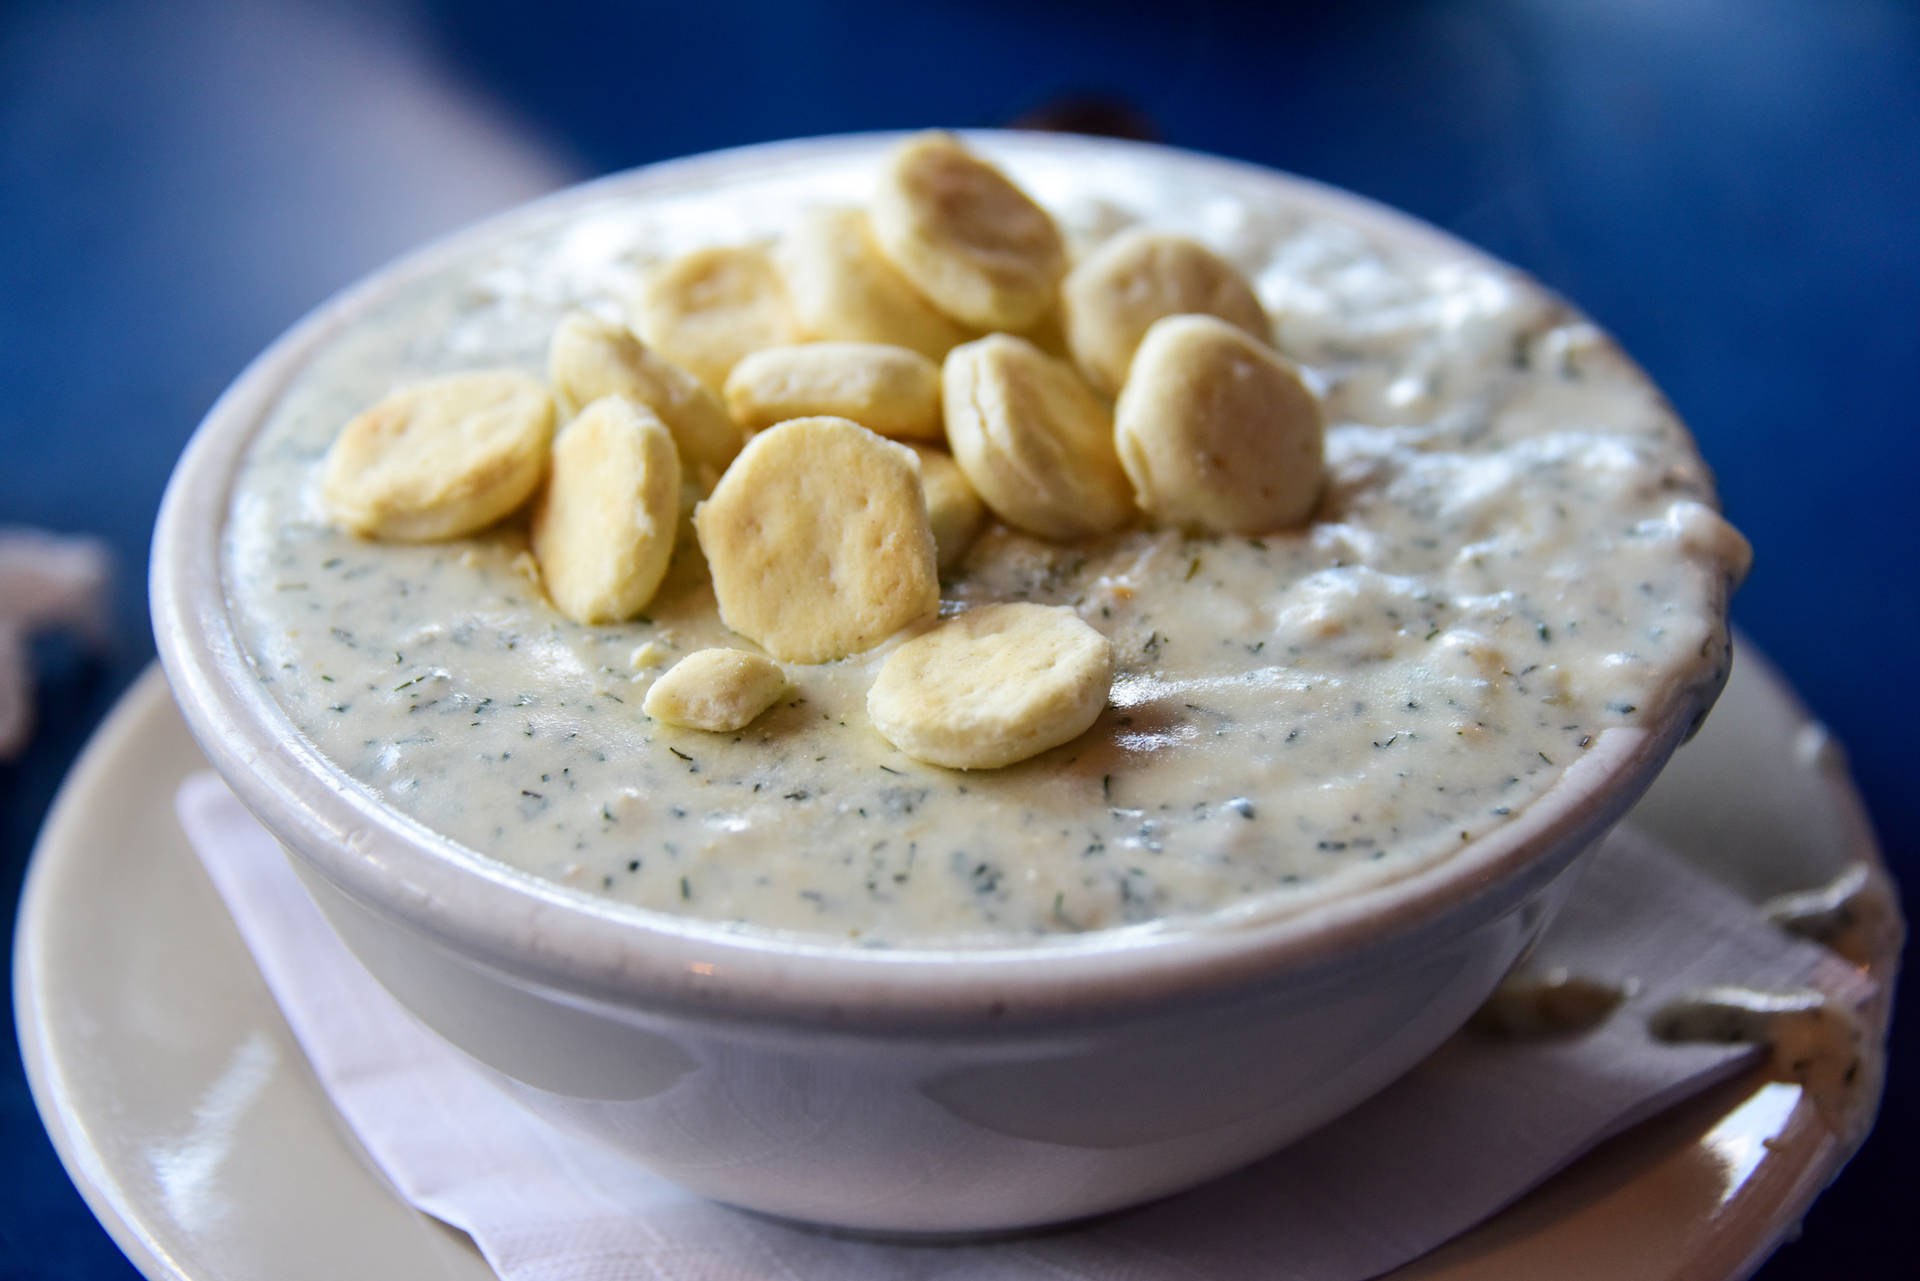 "Delicious New England Clam Chowder Topped with Fluffy Biscuits" Wallpaper